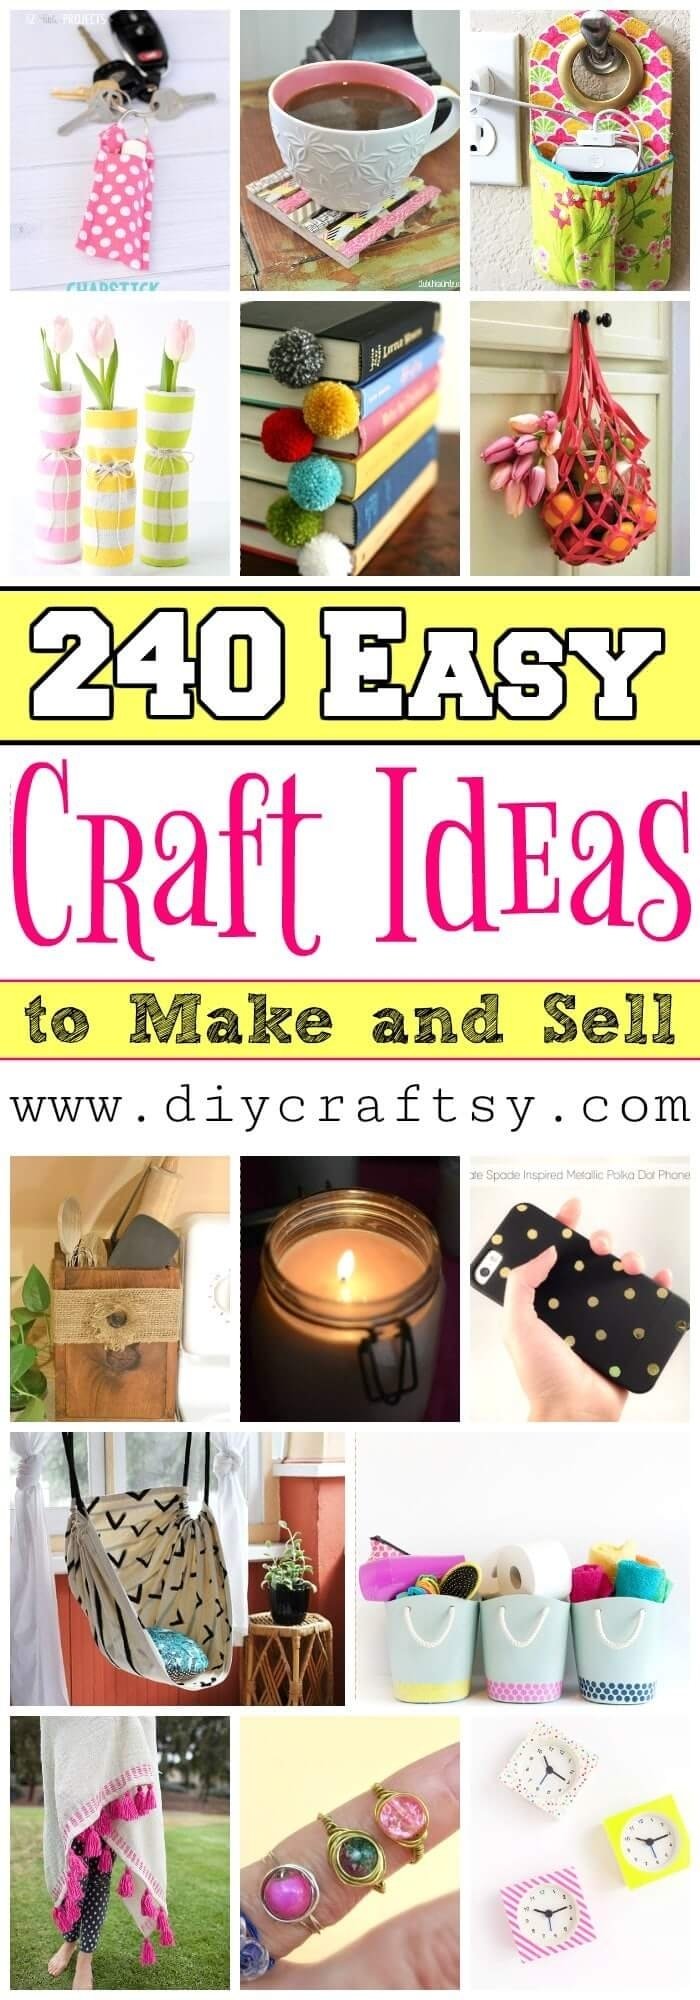 10 Awesome Craft Ideas To Make And Sell 240 easy craft ideas to make and sell diy crafts 1 2022